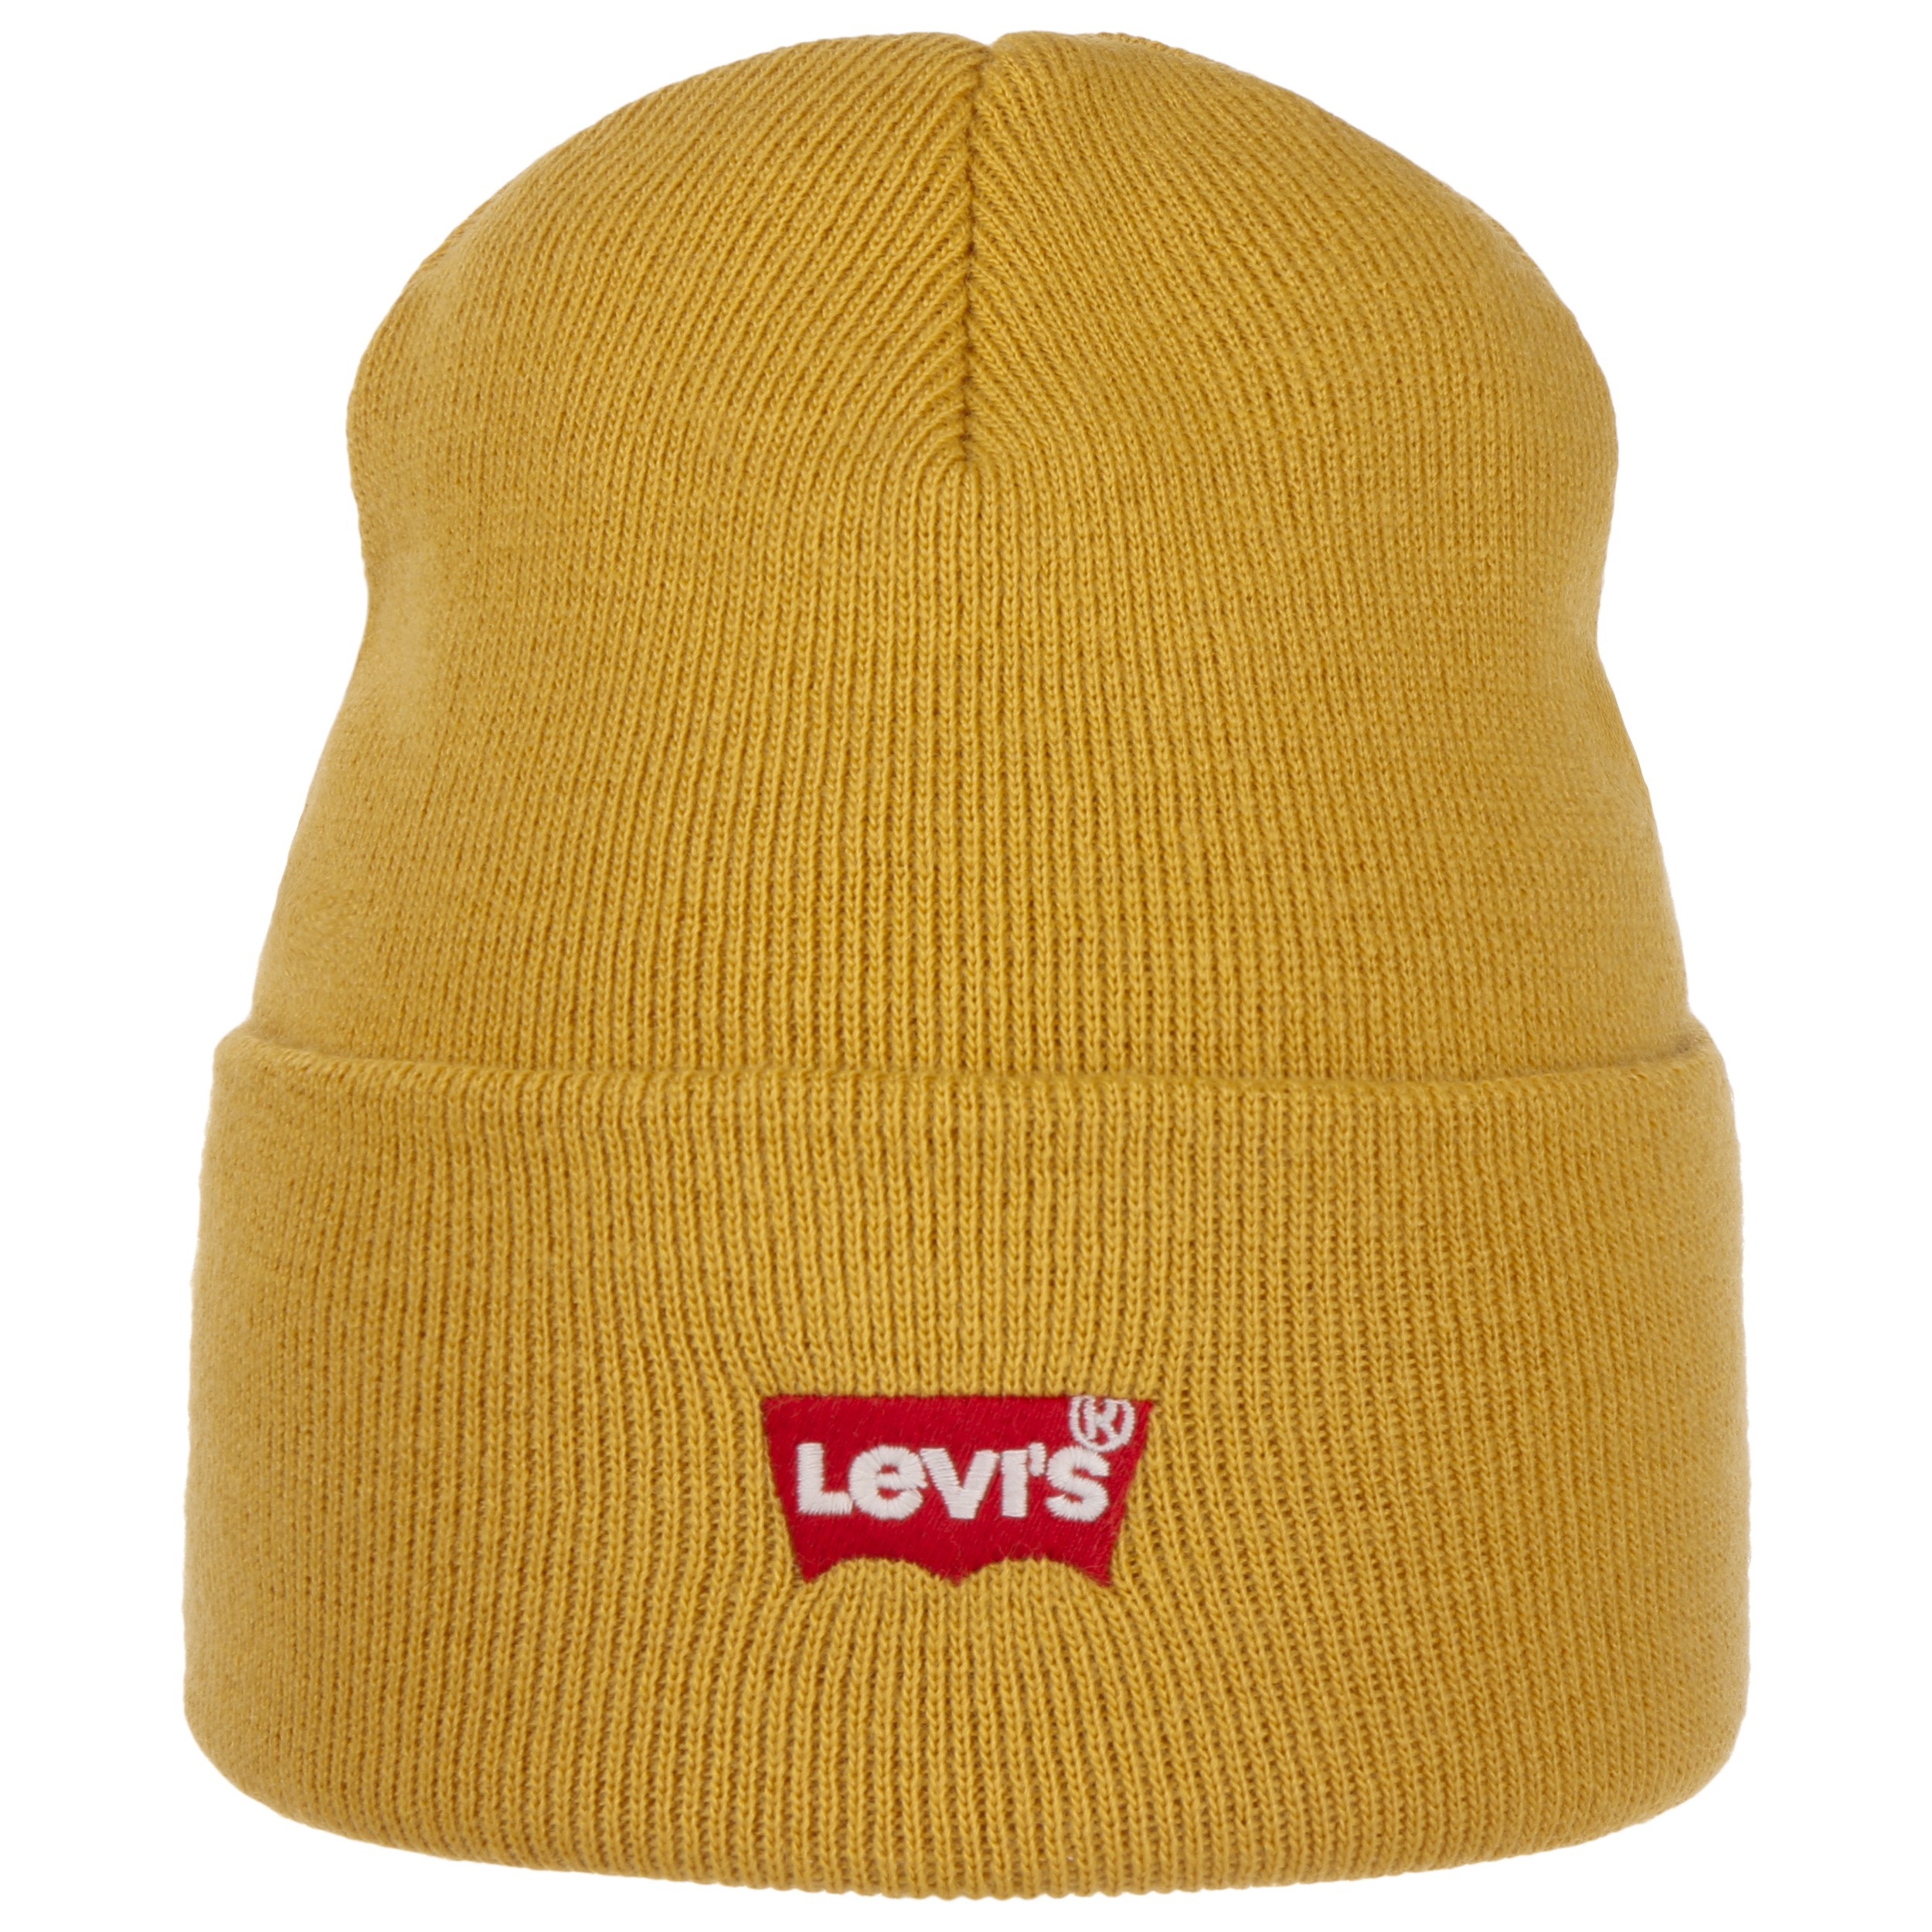 Red Batwing Slouchy Beanie Hat by Levi´s - 29,95 €